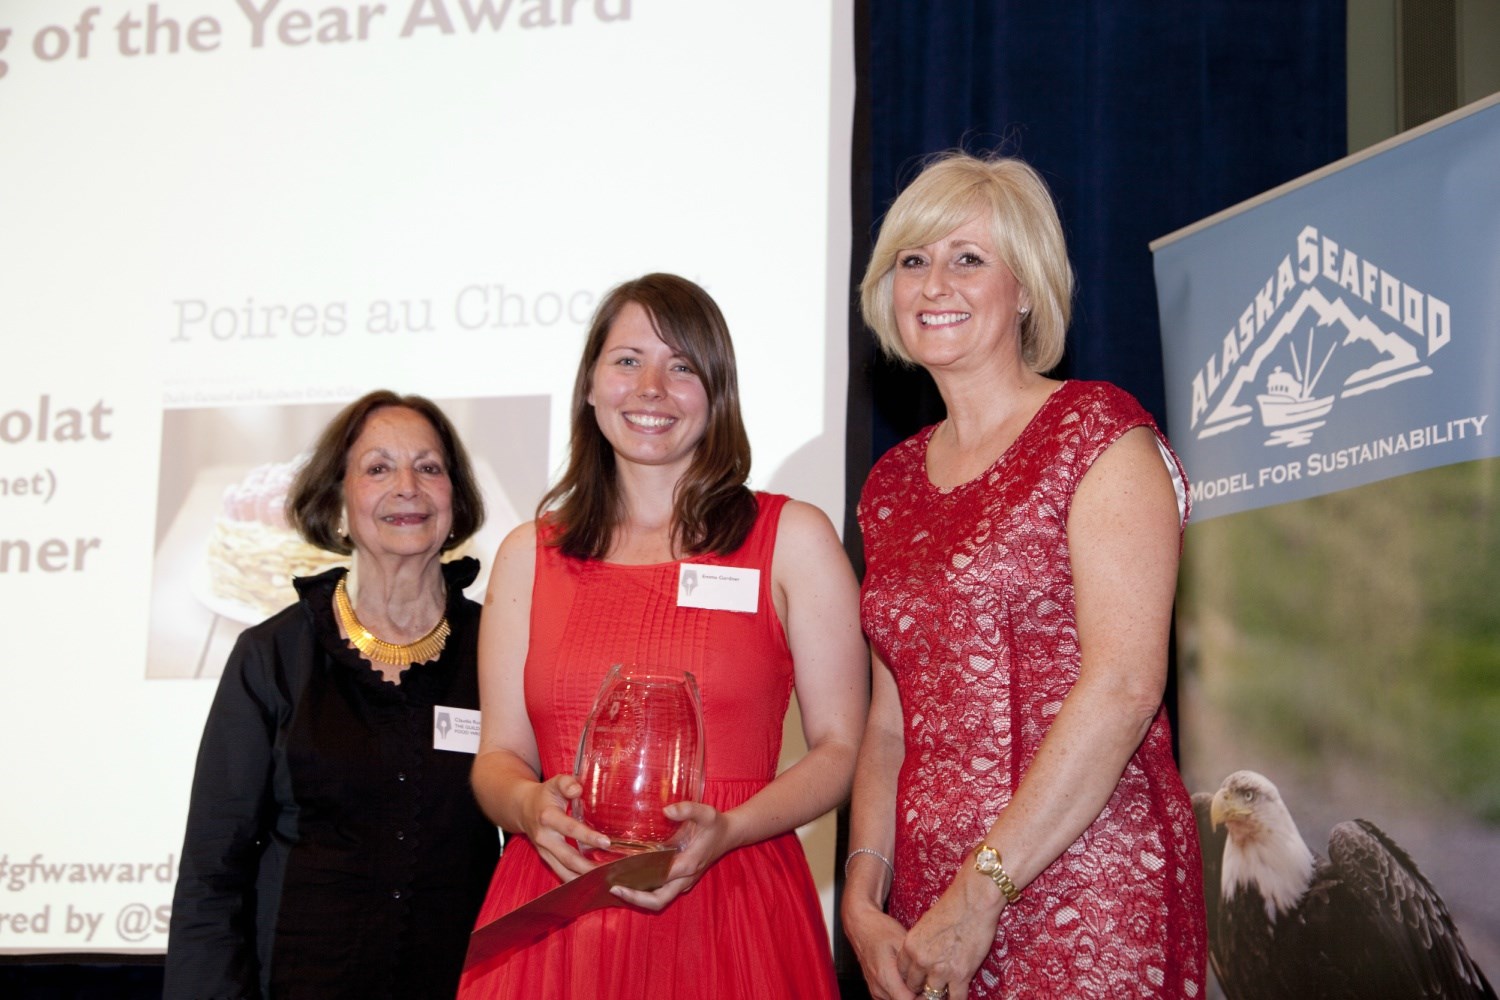 Claudia Roden and Clare Blampied, Managing Director of Sacla' UK (right) presenting Emma Gardner with the Food Blog of the Year Award (sponsored by Sacla' UK)